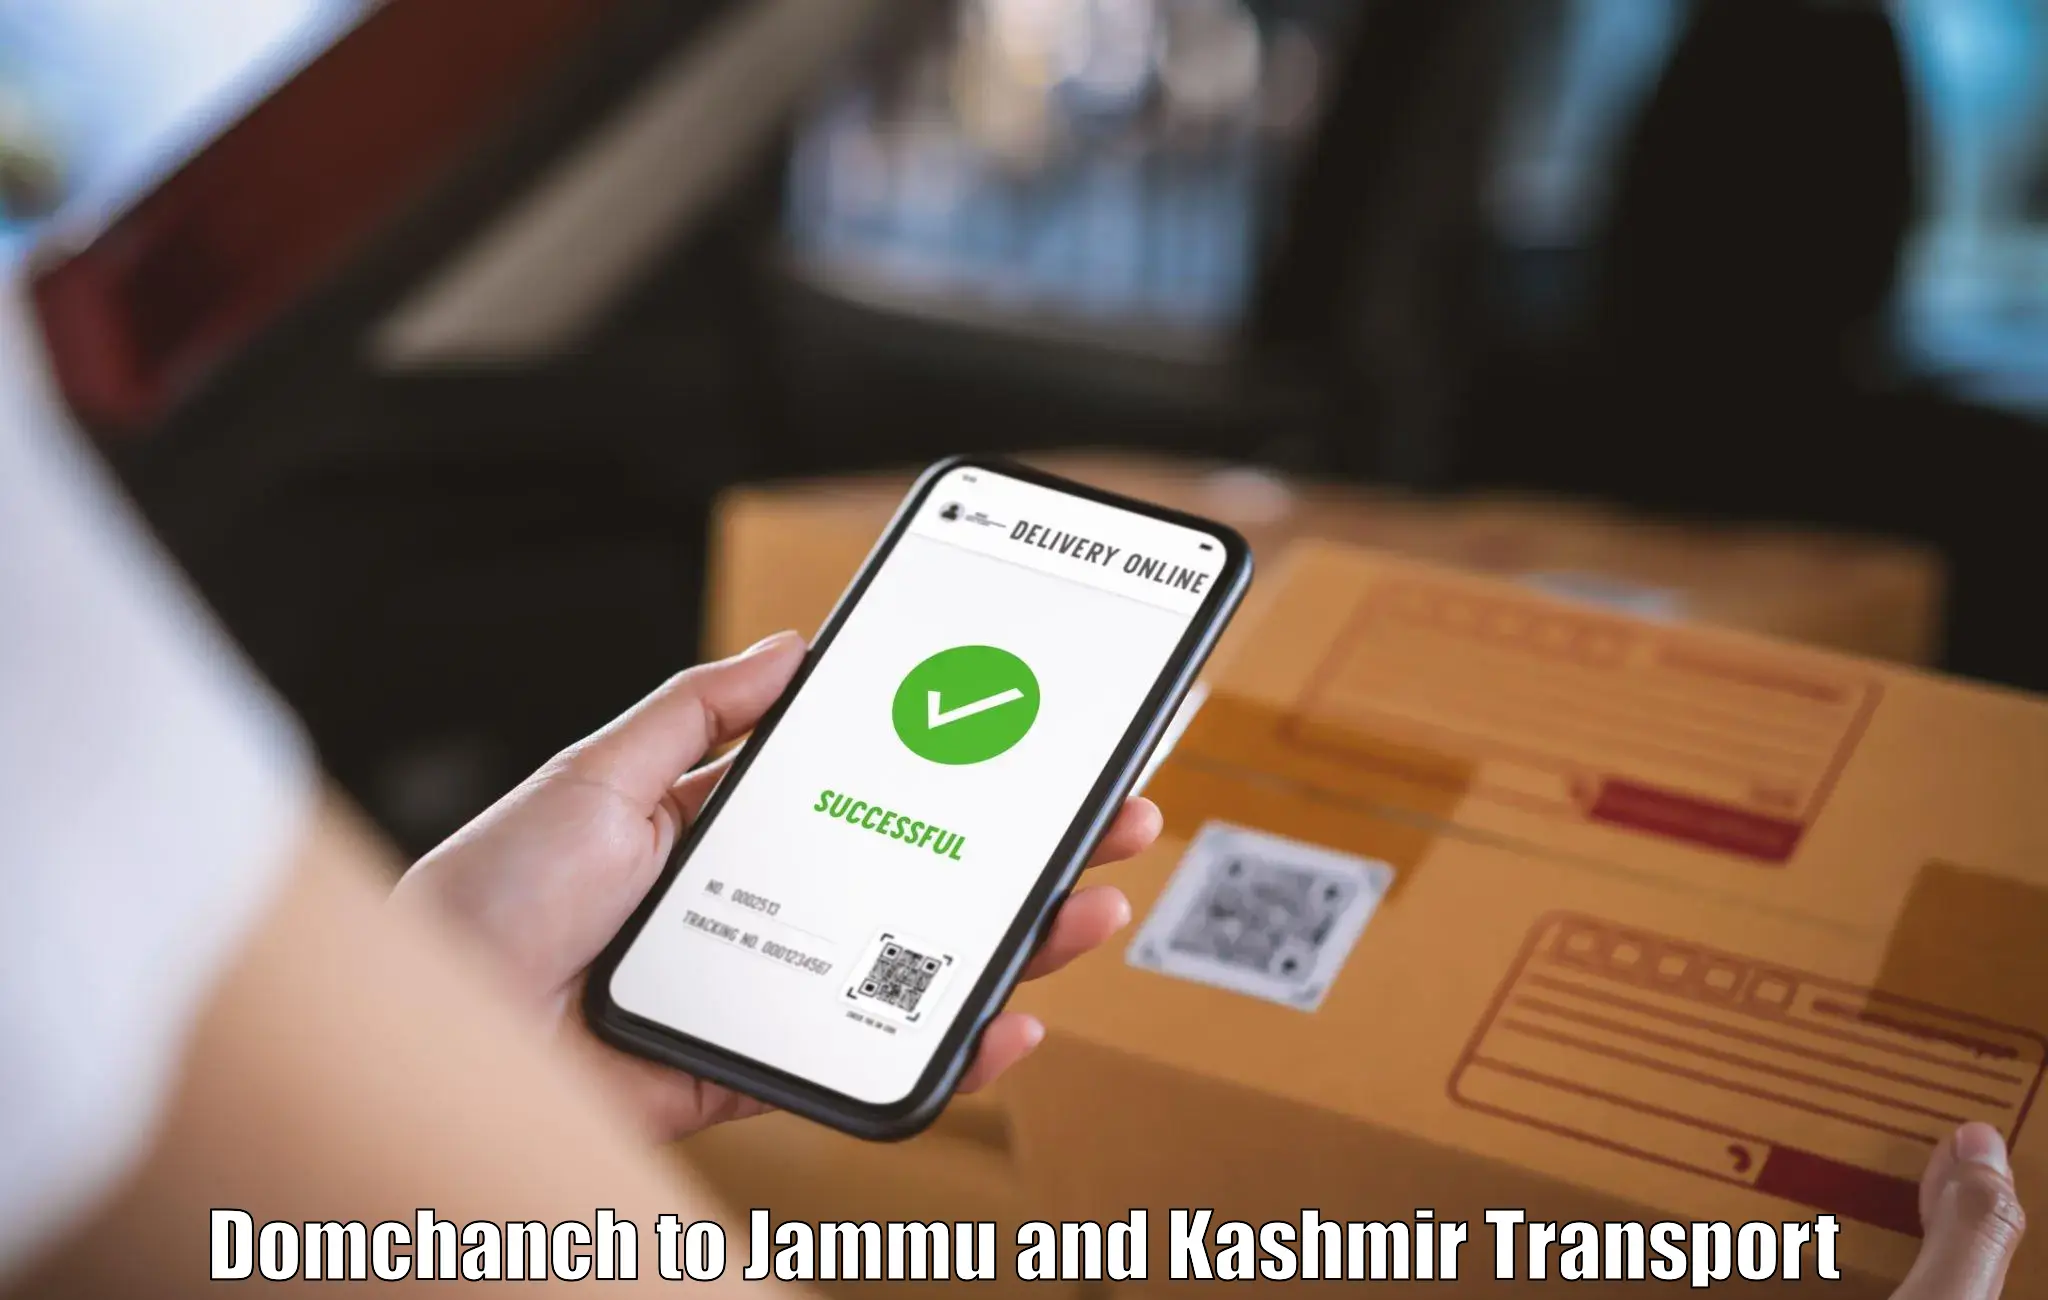 Transport shared services Domchanch to Pulwama